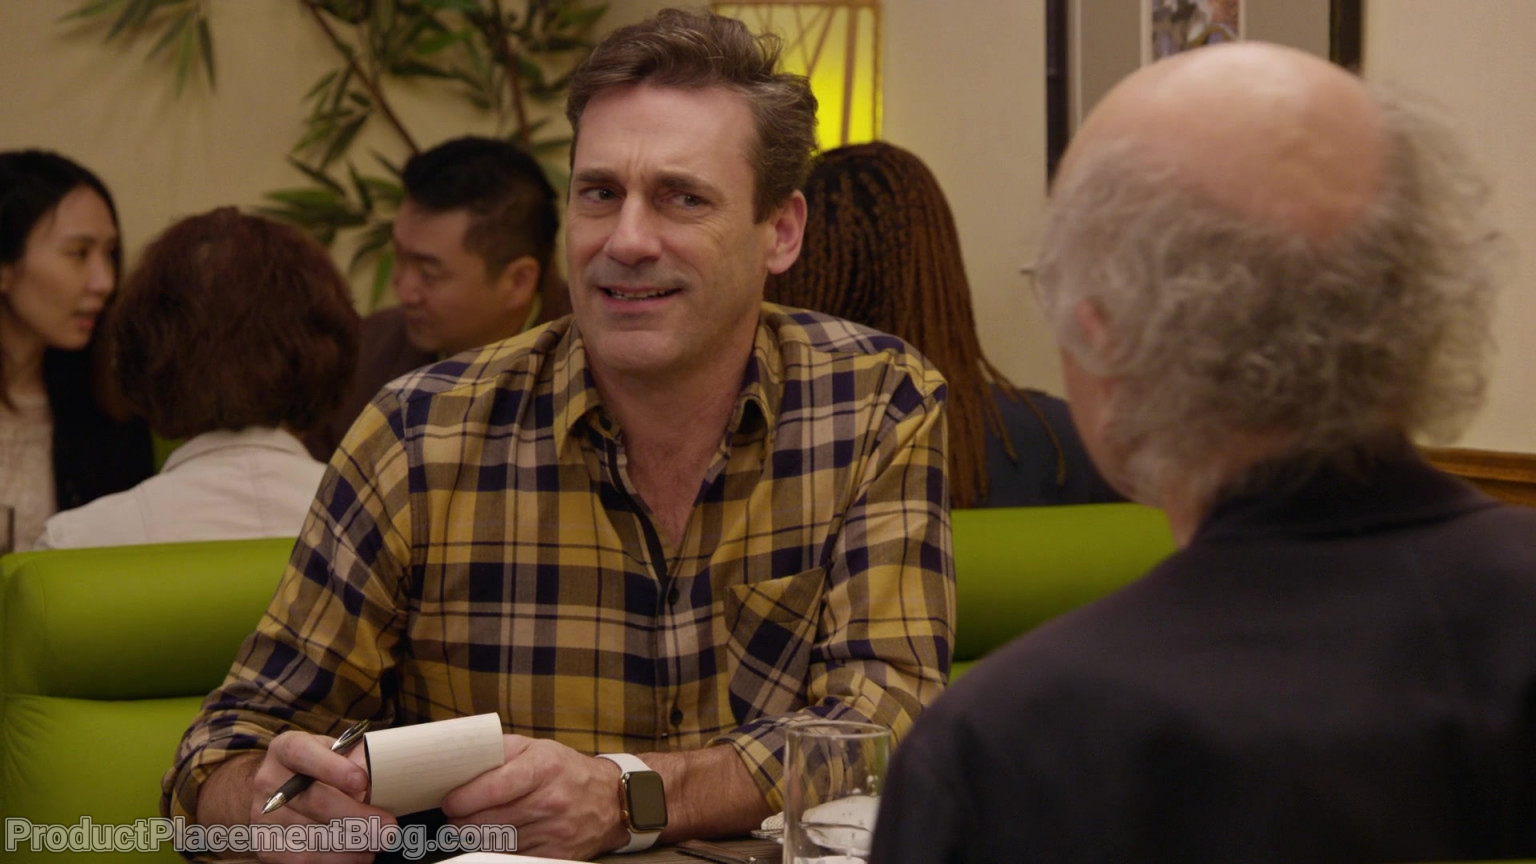 Apple Watch Worn By Jon Hamm In Curb Your Enthusiasm S10E08 